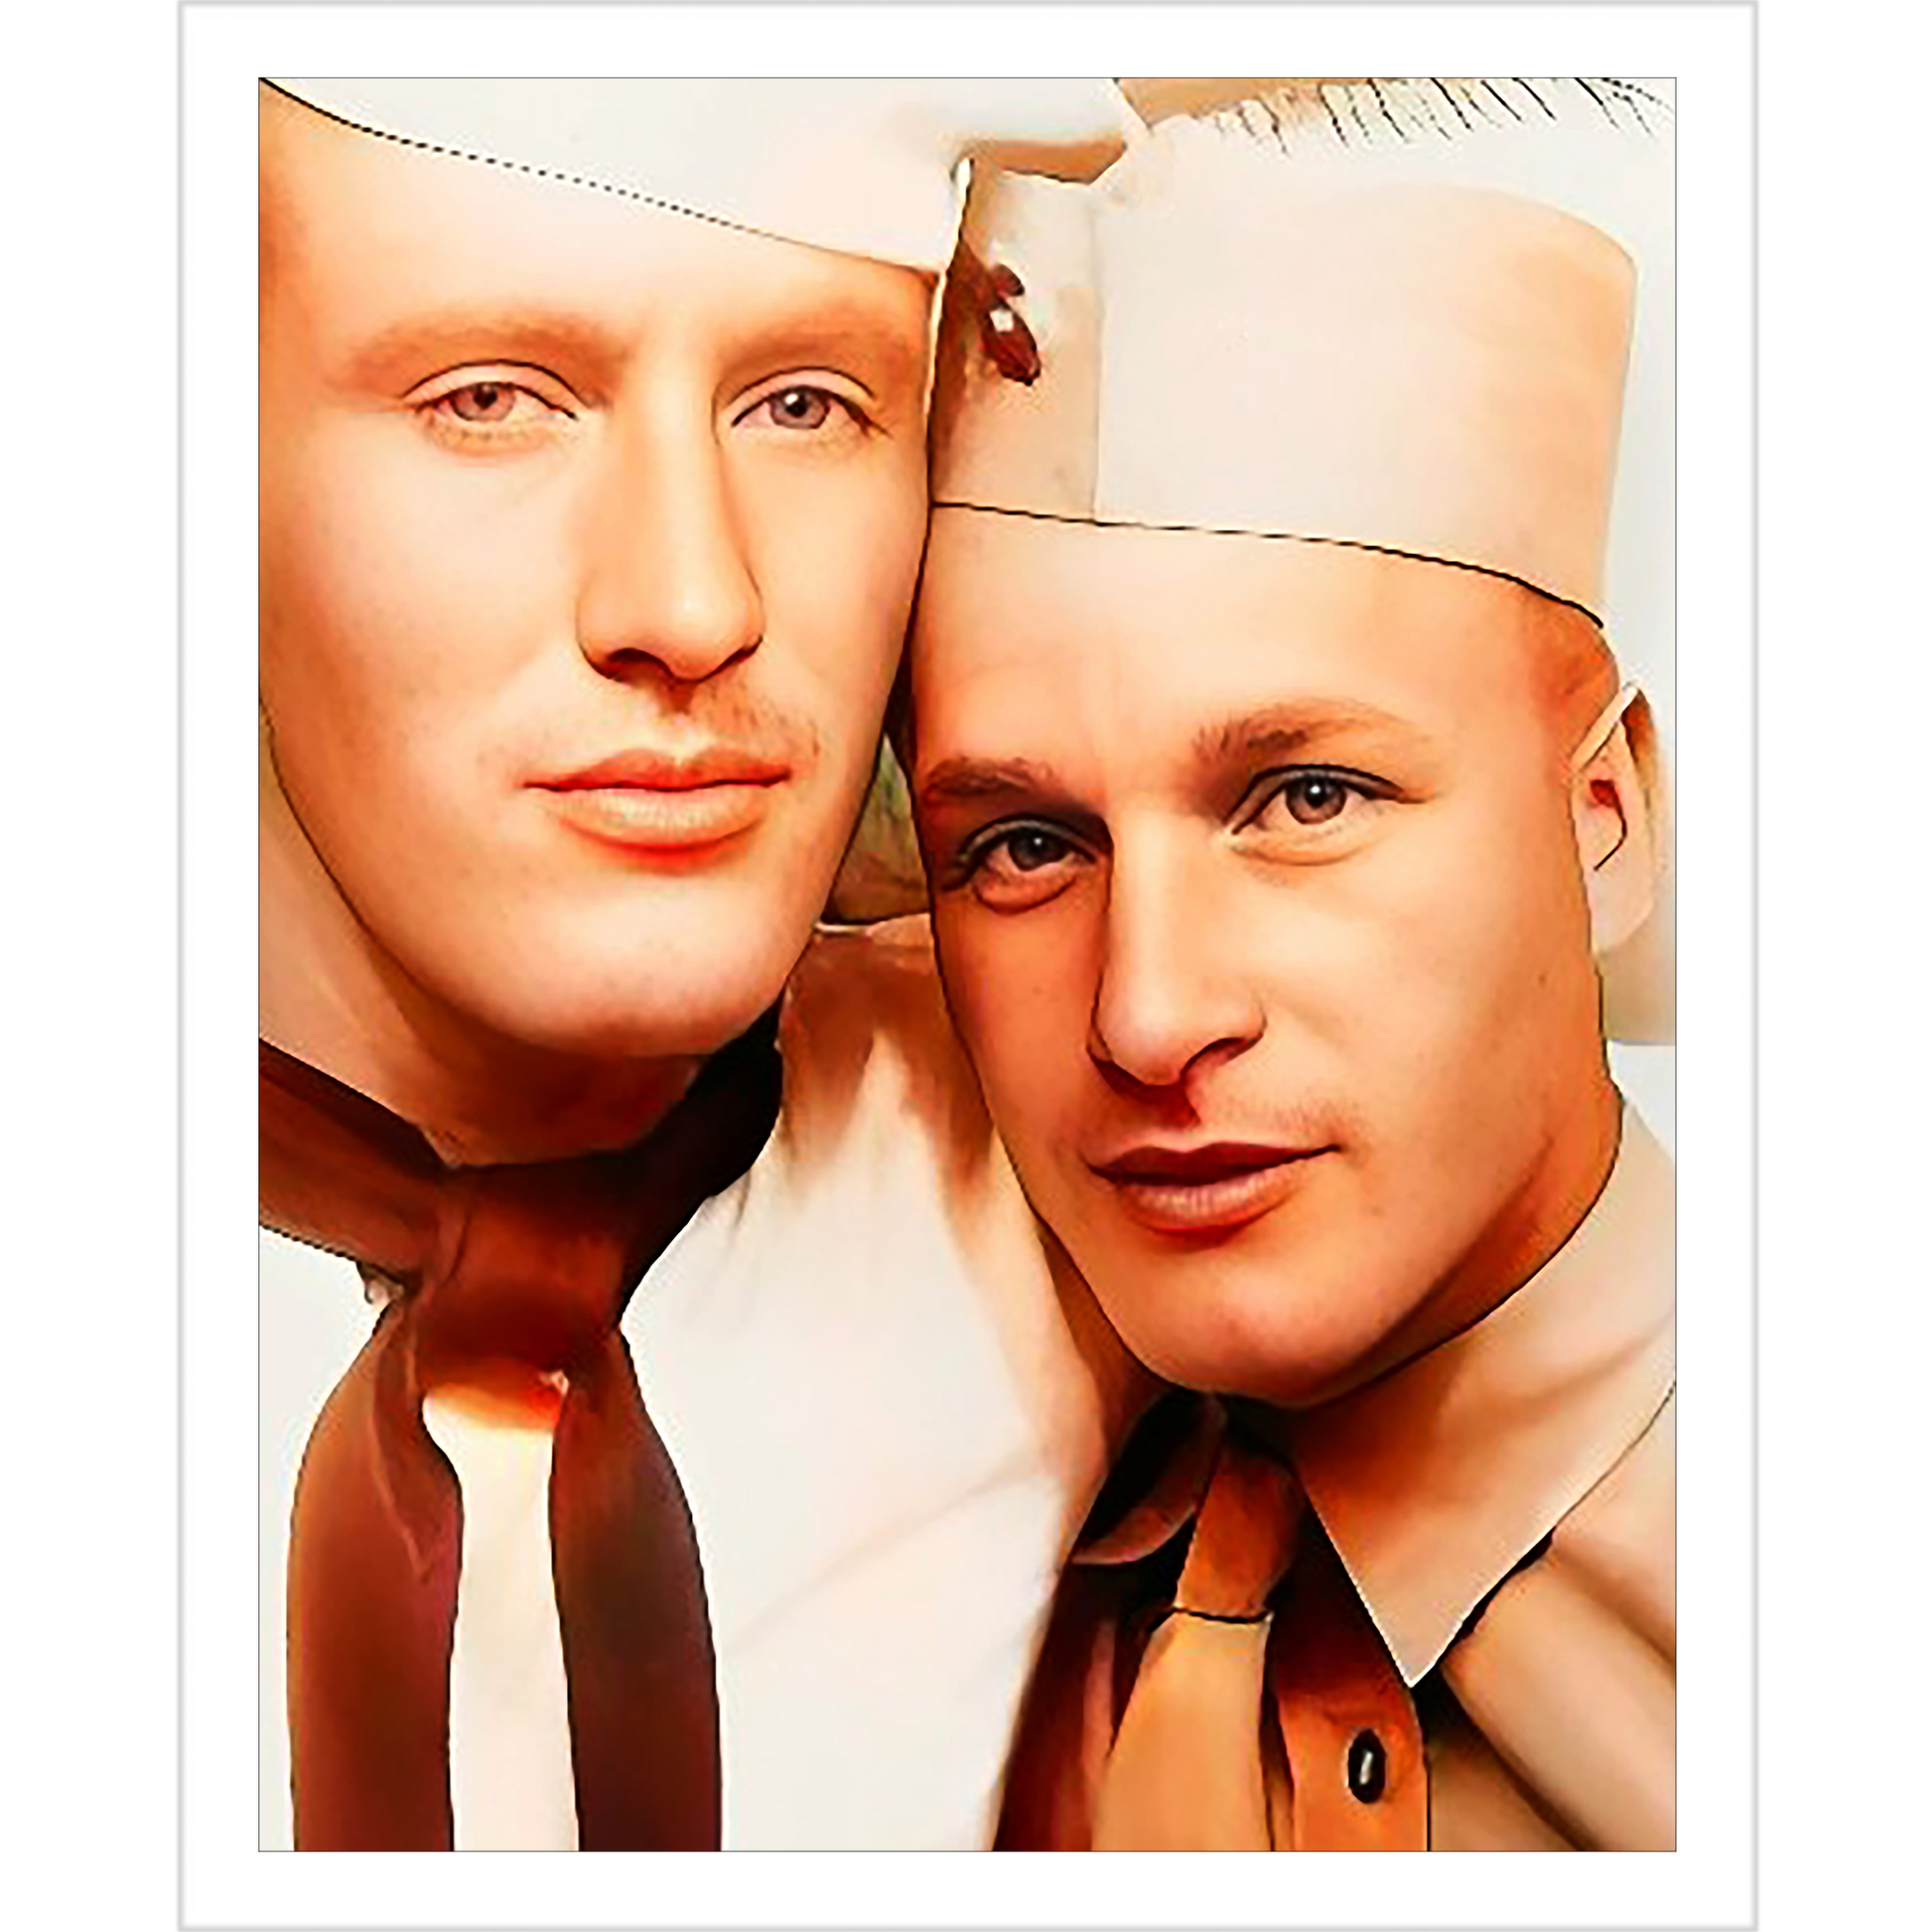 paire 042 | Giclee Artist Print Vintage Affectionate Men Brass Rail San Diego Photobooth Gay Military